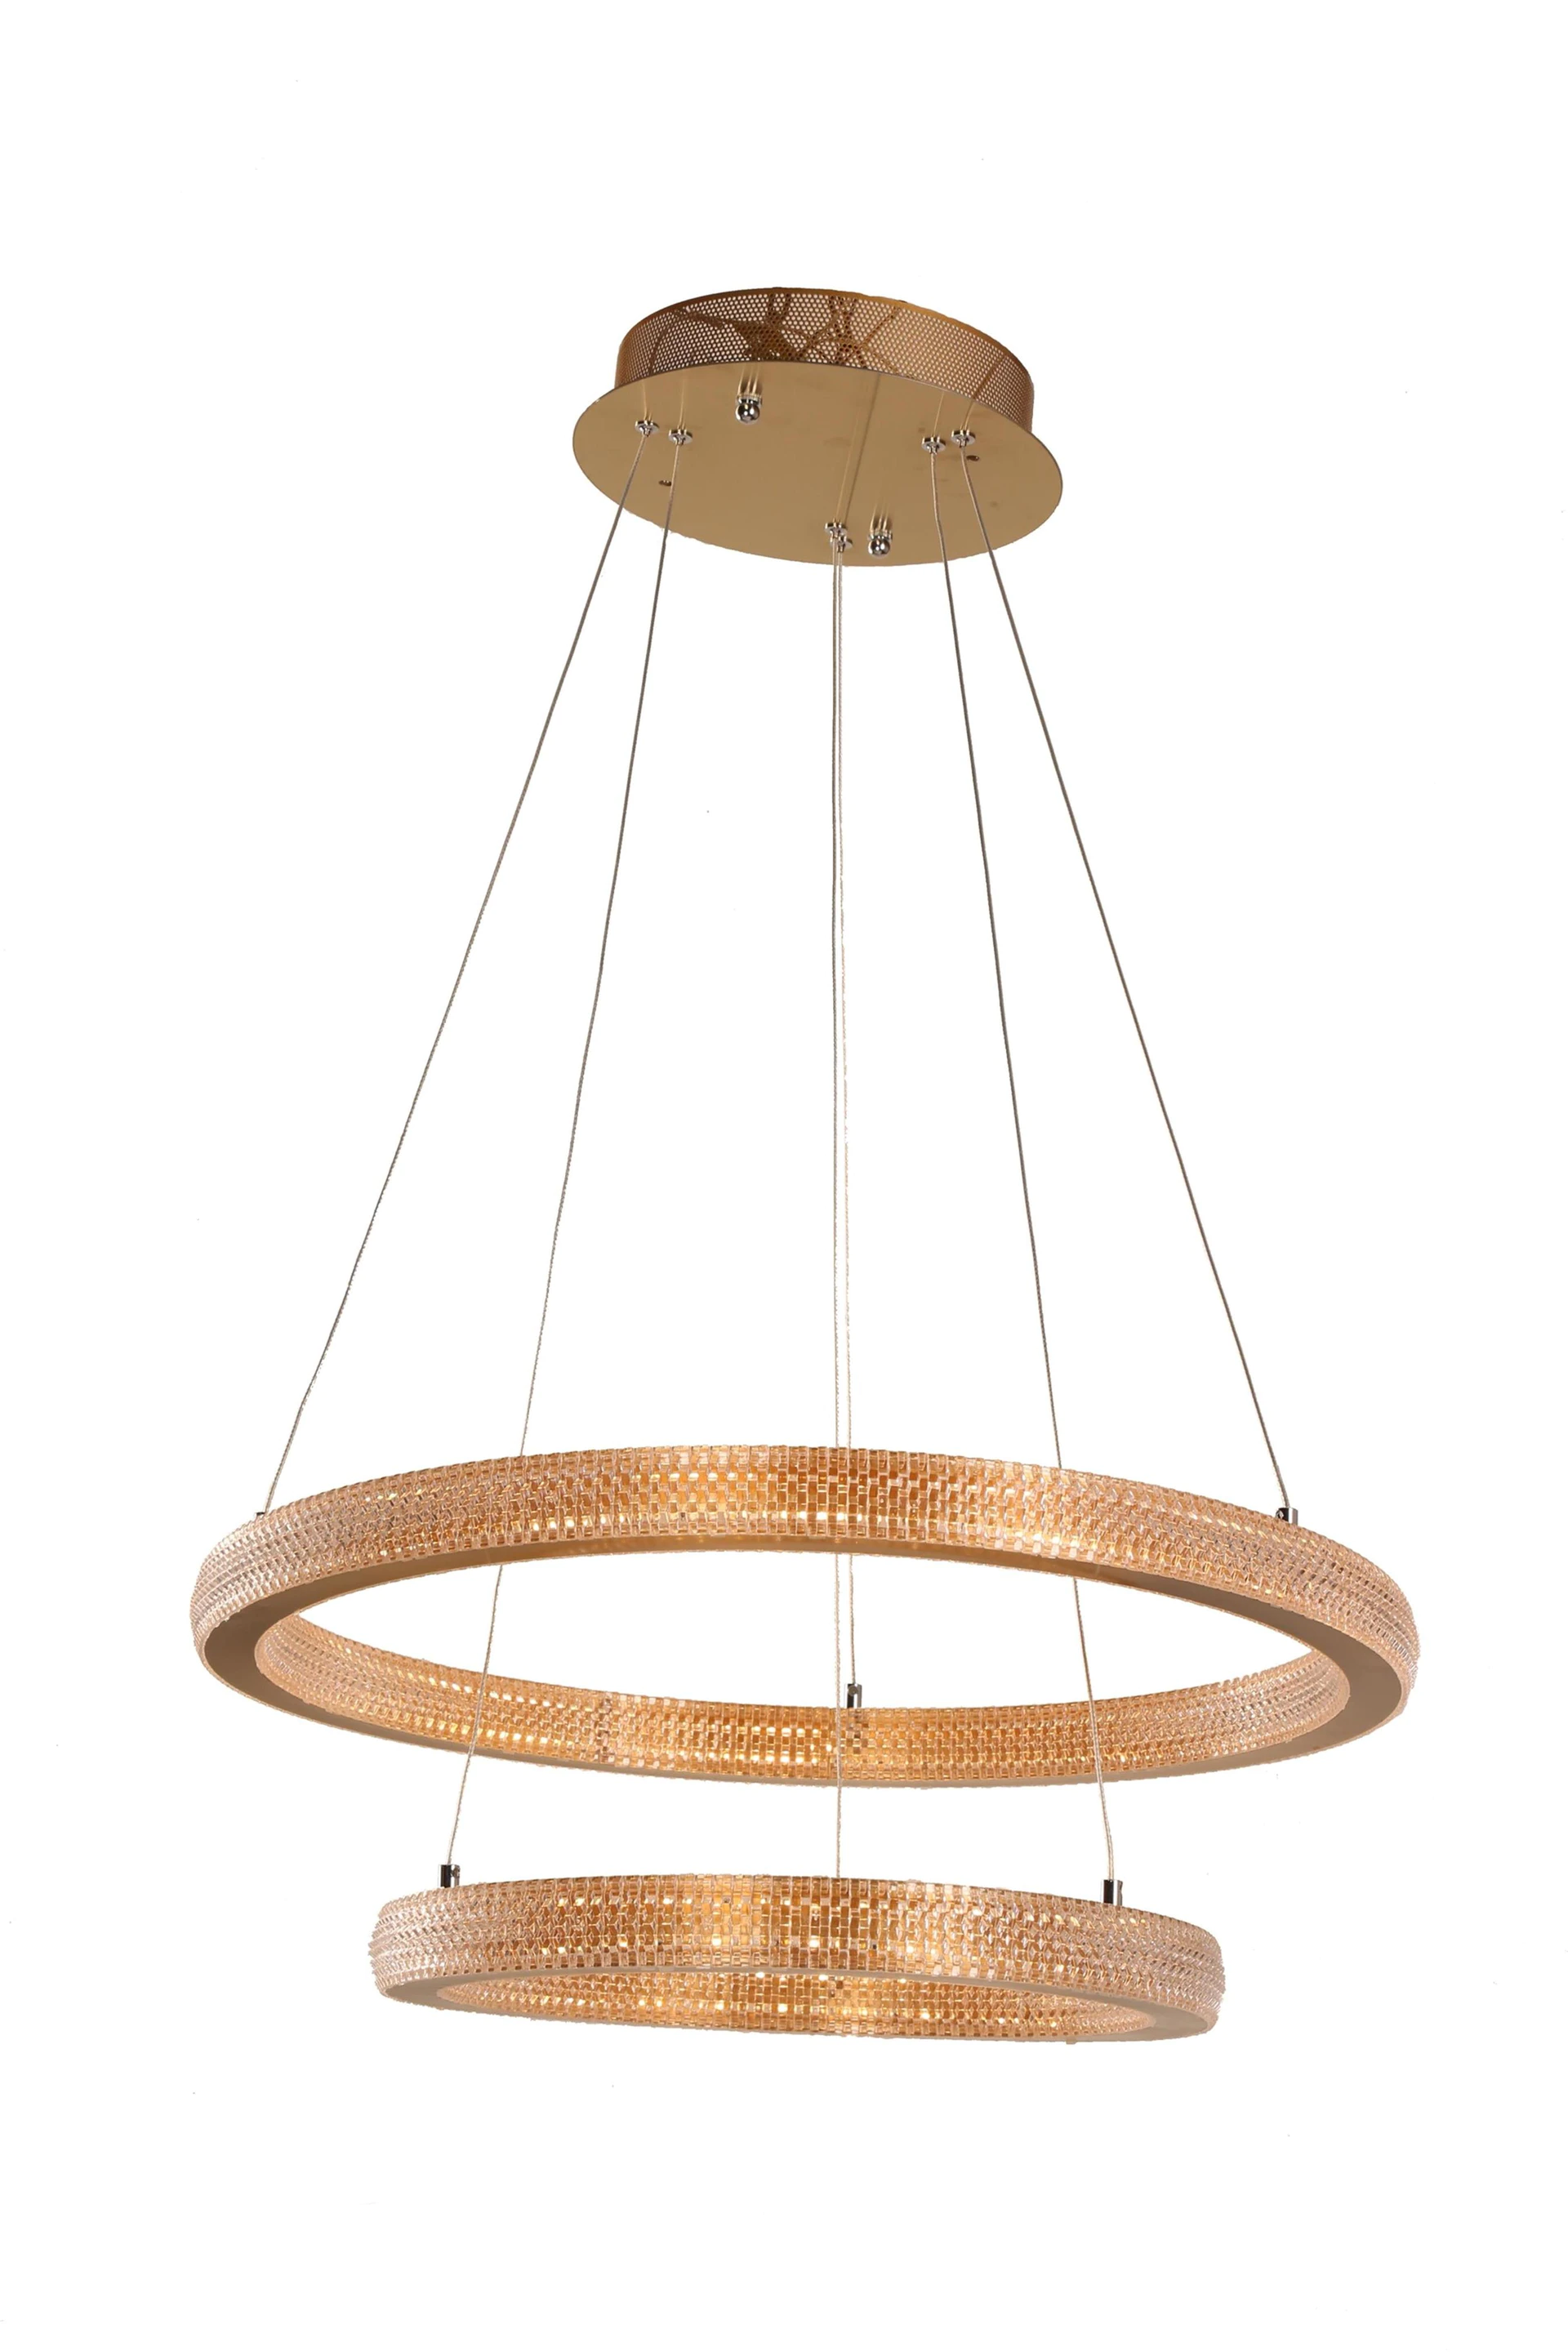 Saintly light hanging ceiling lights long-term-use for kitchen island